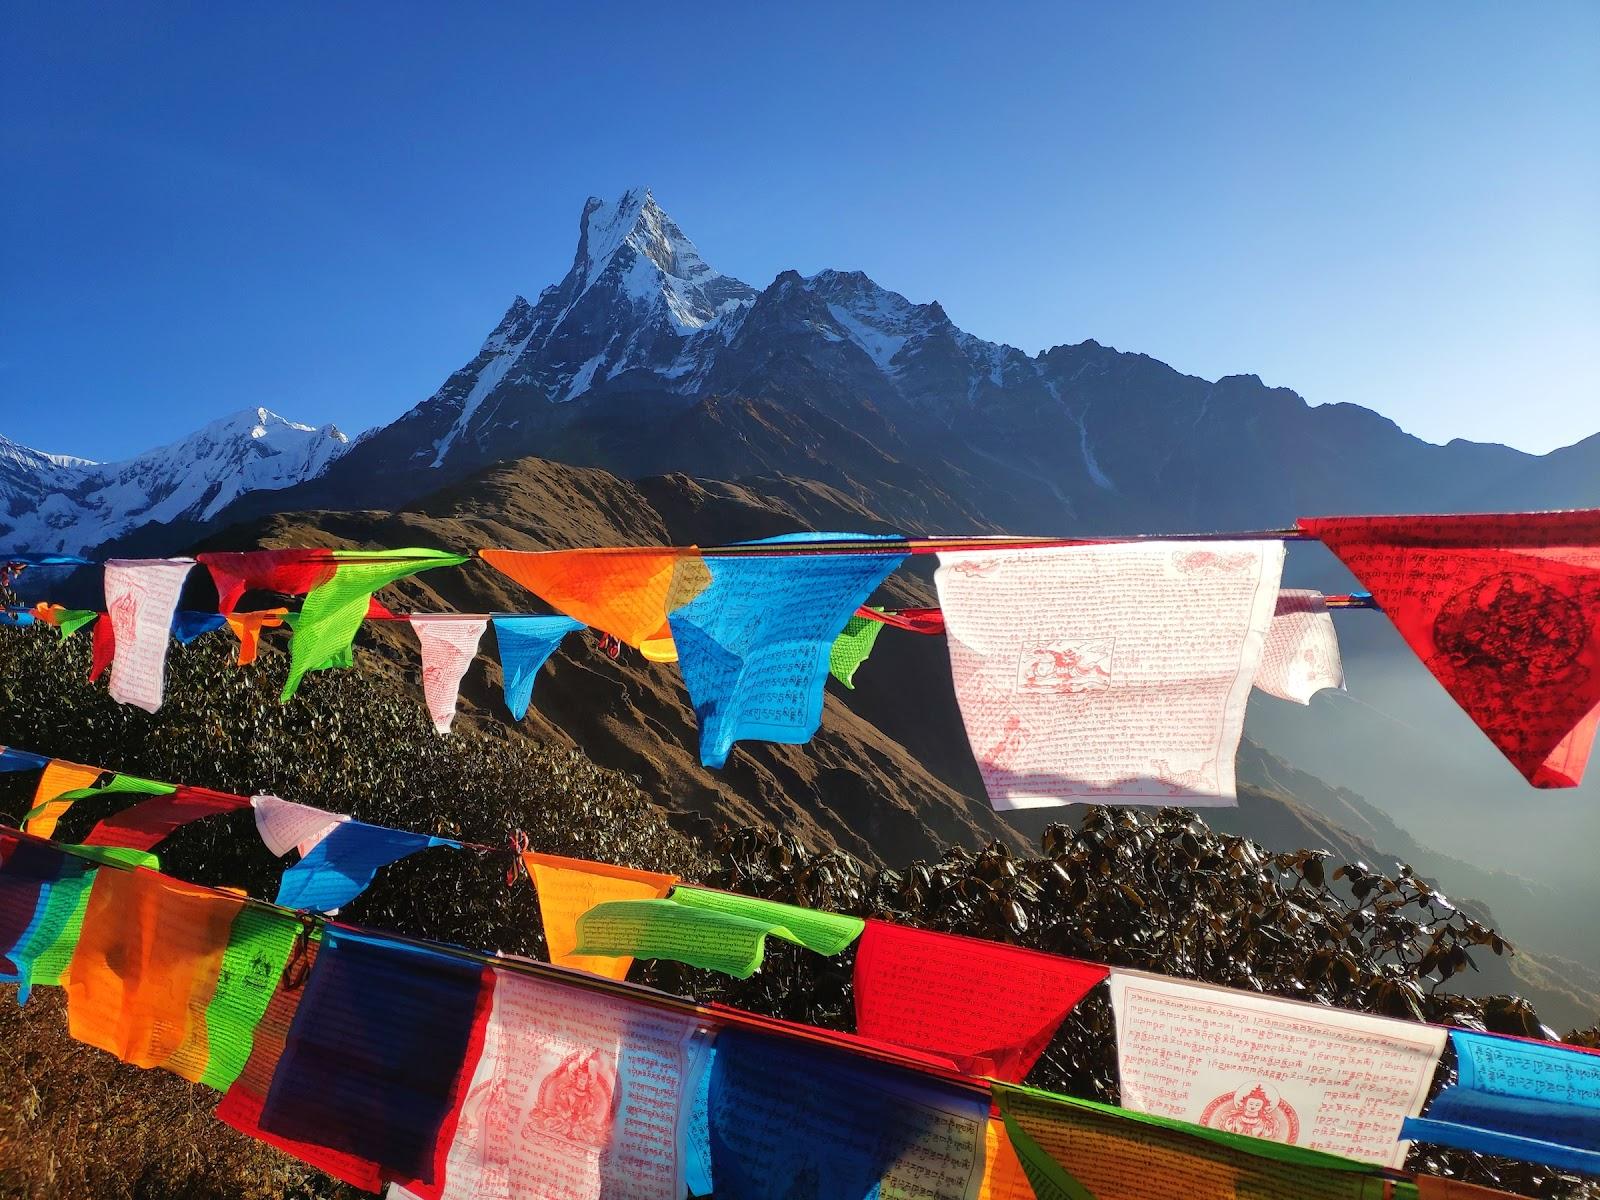 Mardi Himal, a mountain range in Nepal, adorned with colourful prayer flags.